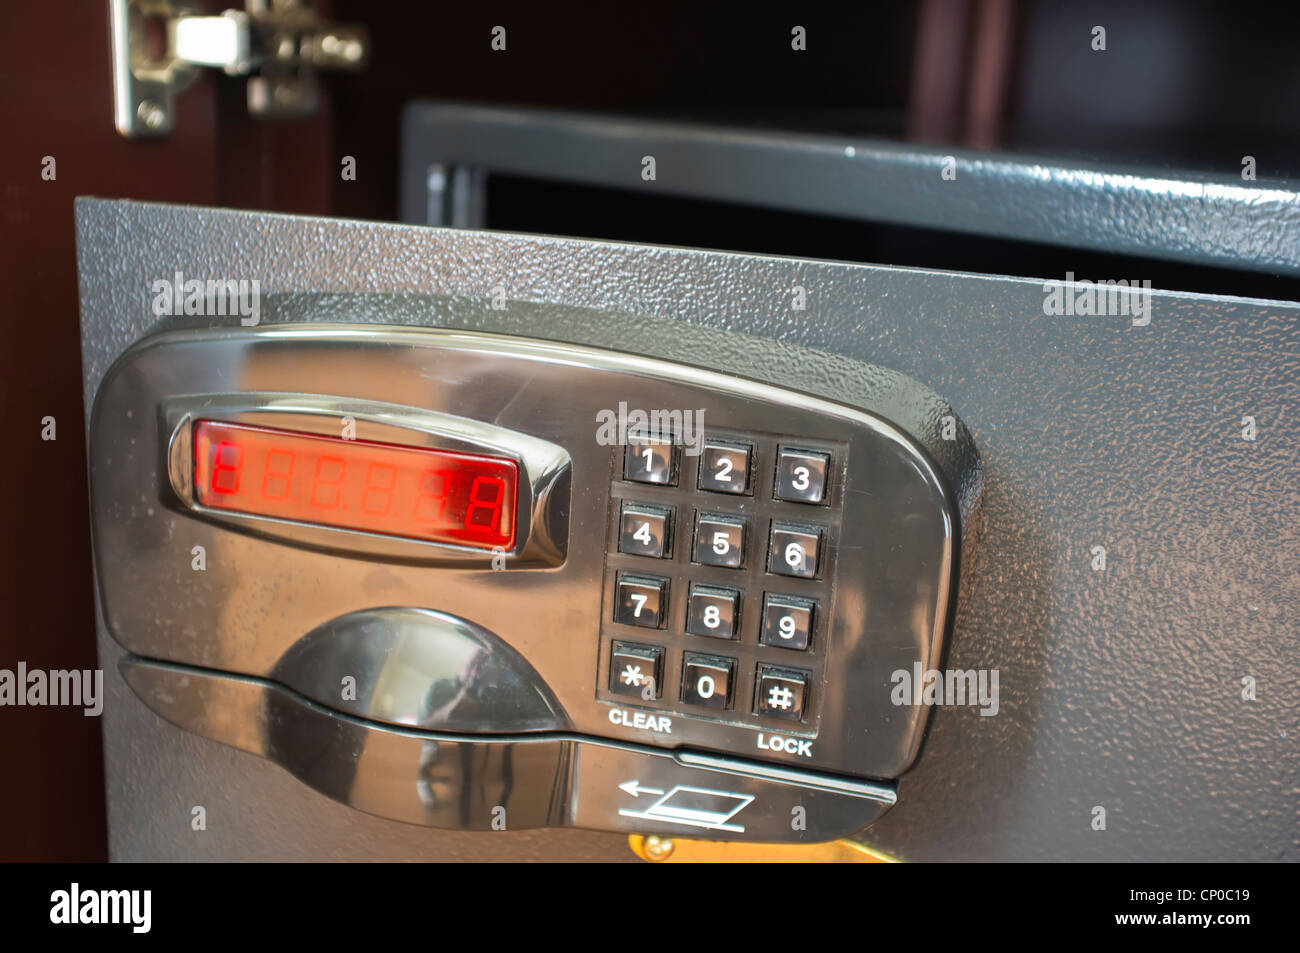 Open hotel room safe with electronic keypad and digital display Stock Photo